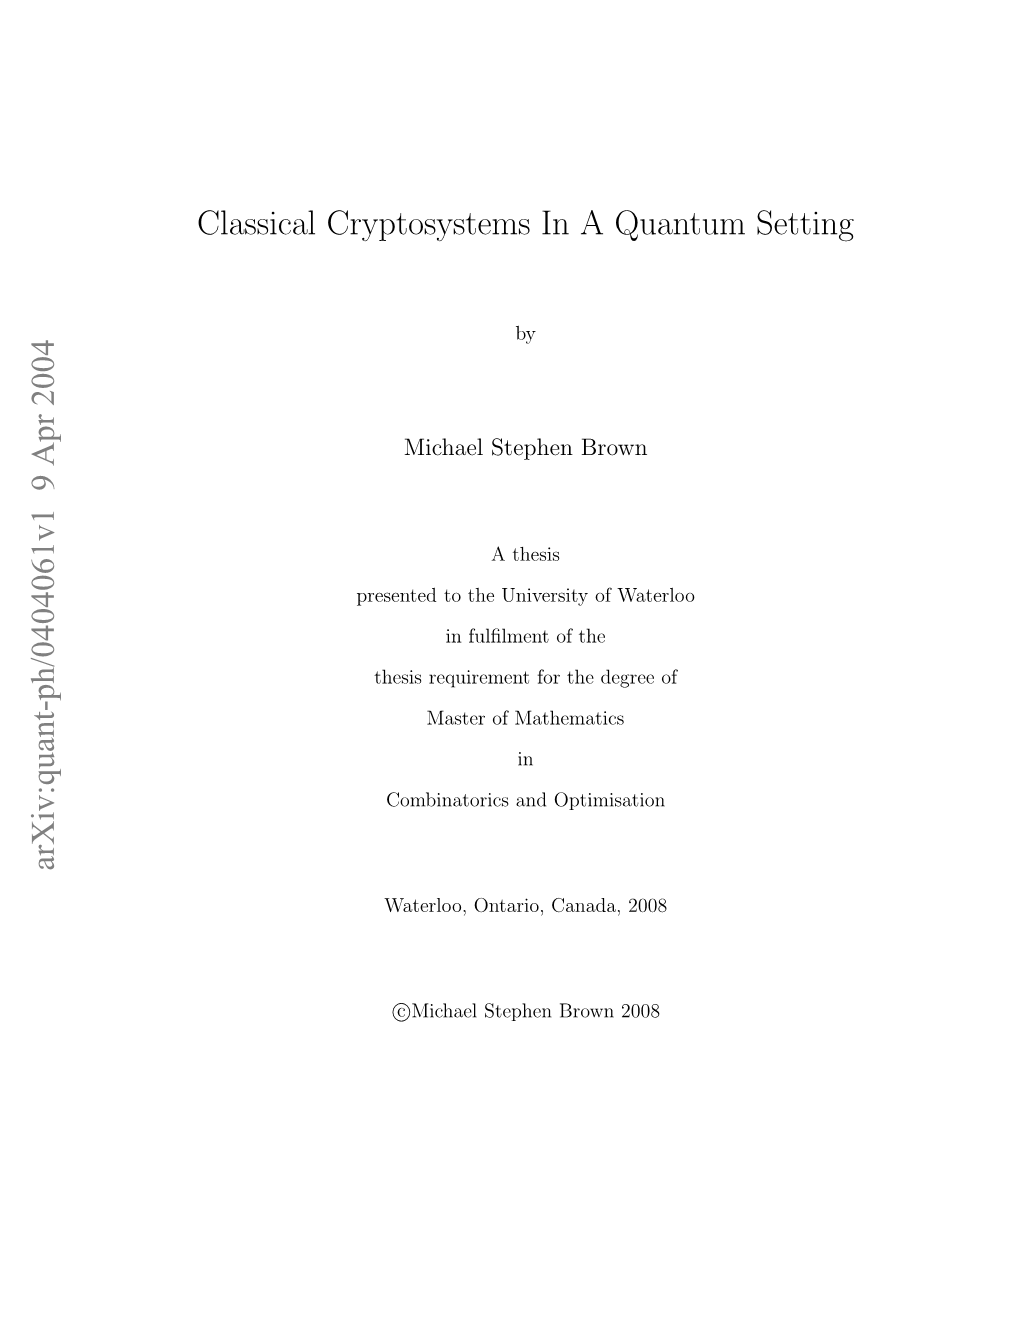 Classical Cryptosystems in a Quantum Setting